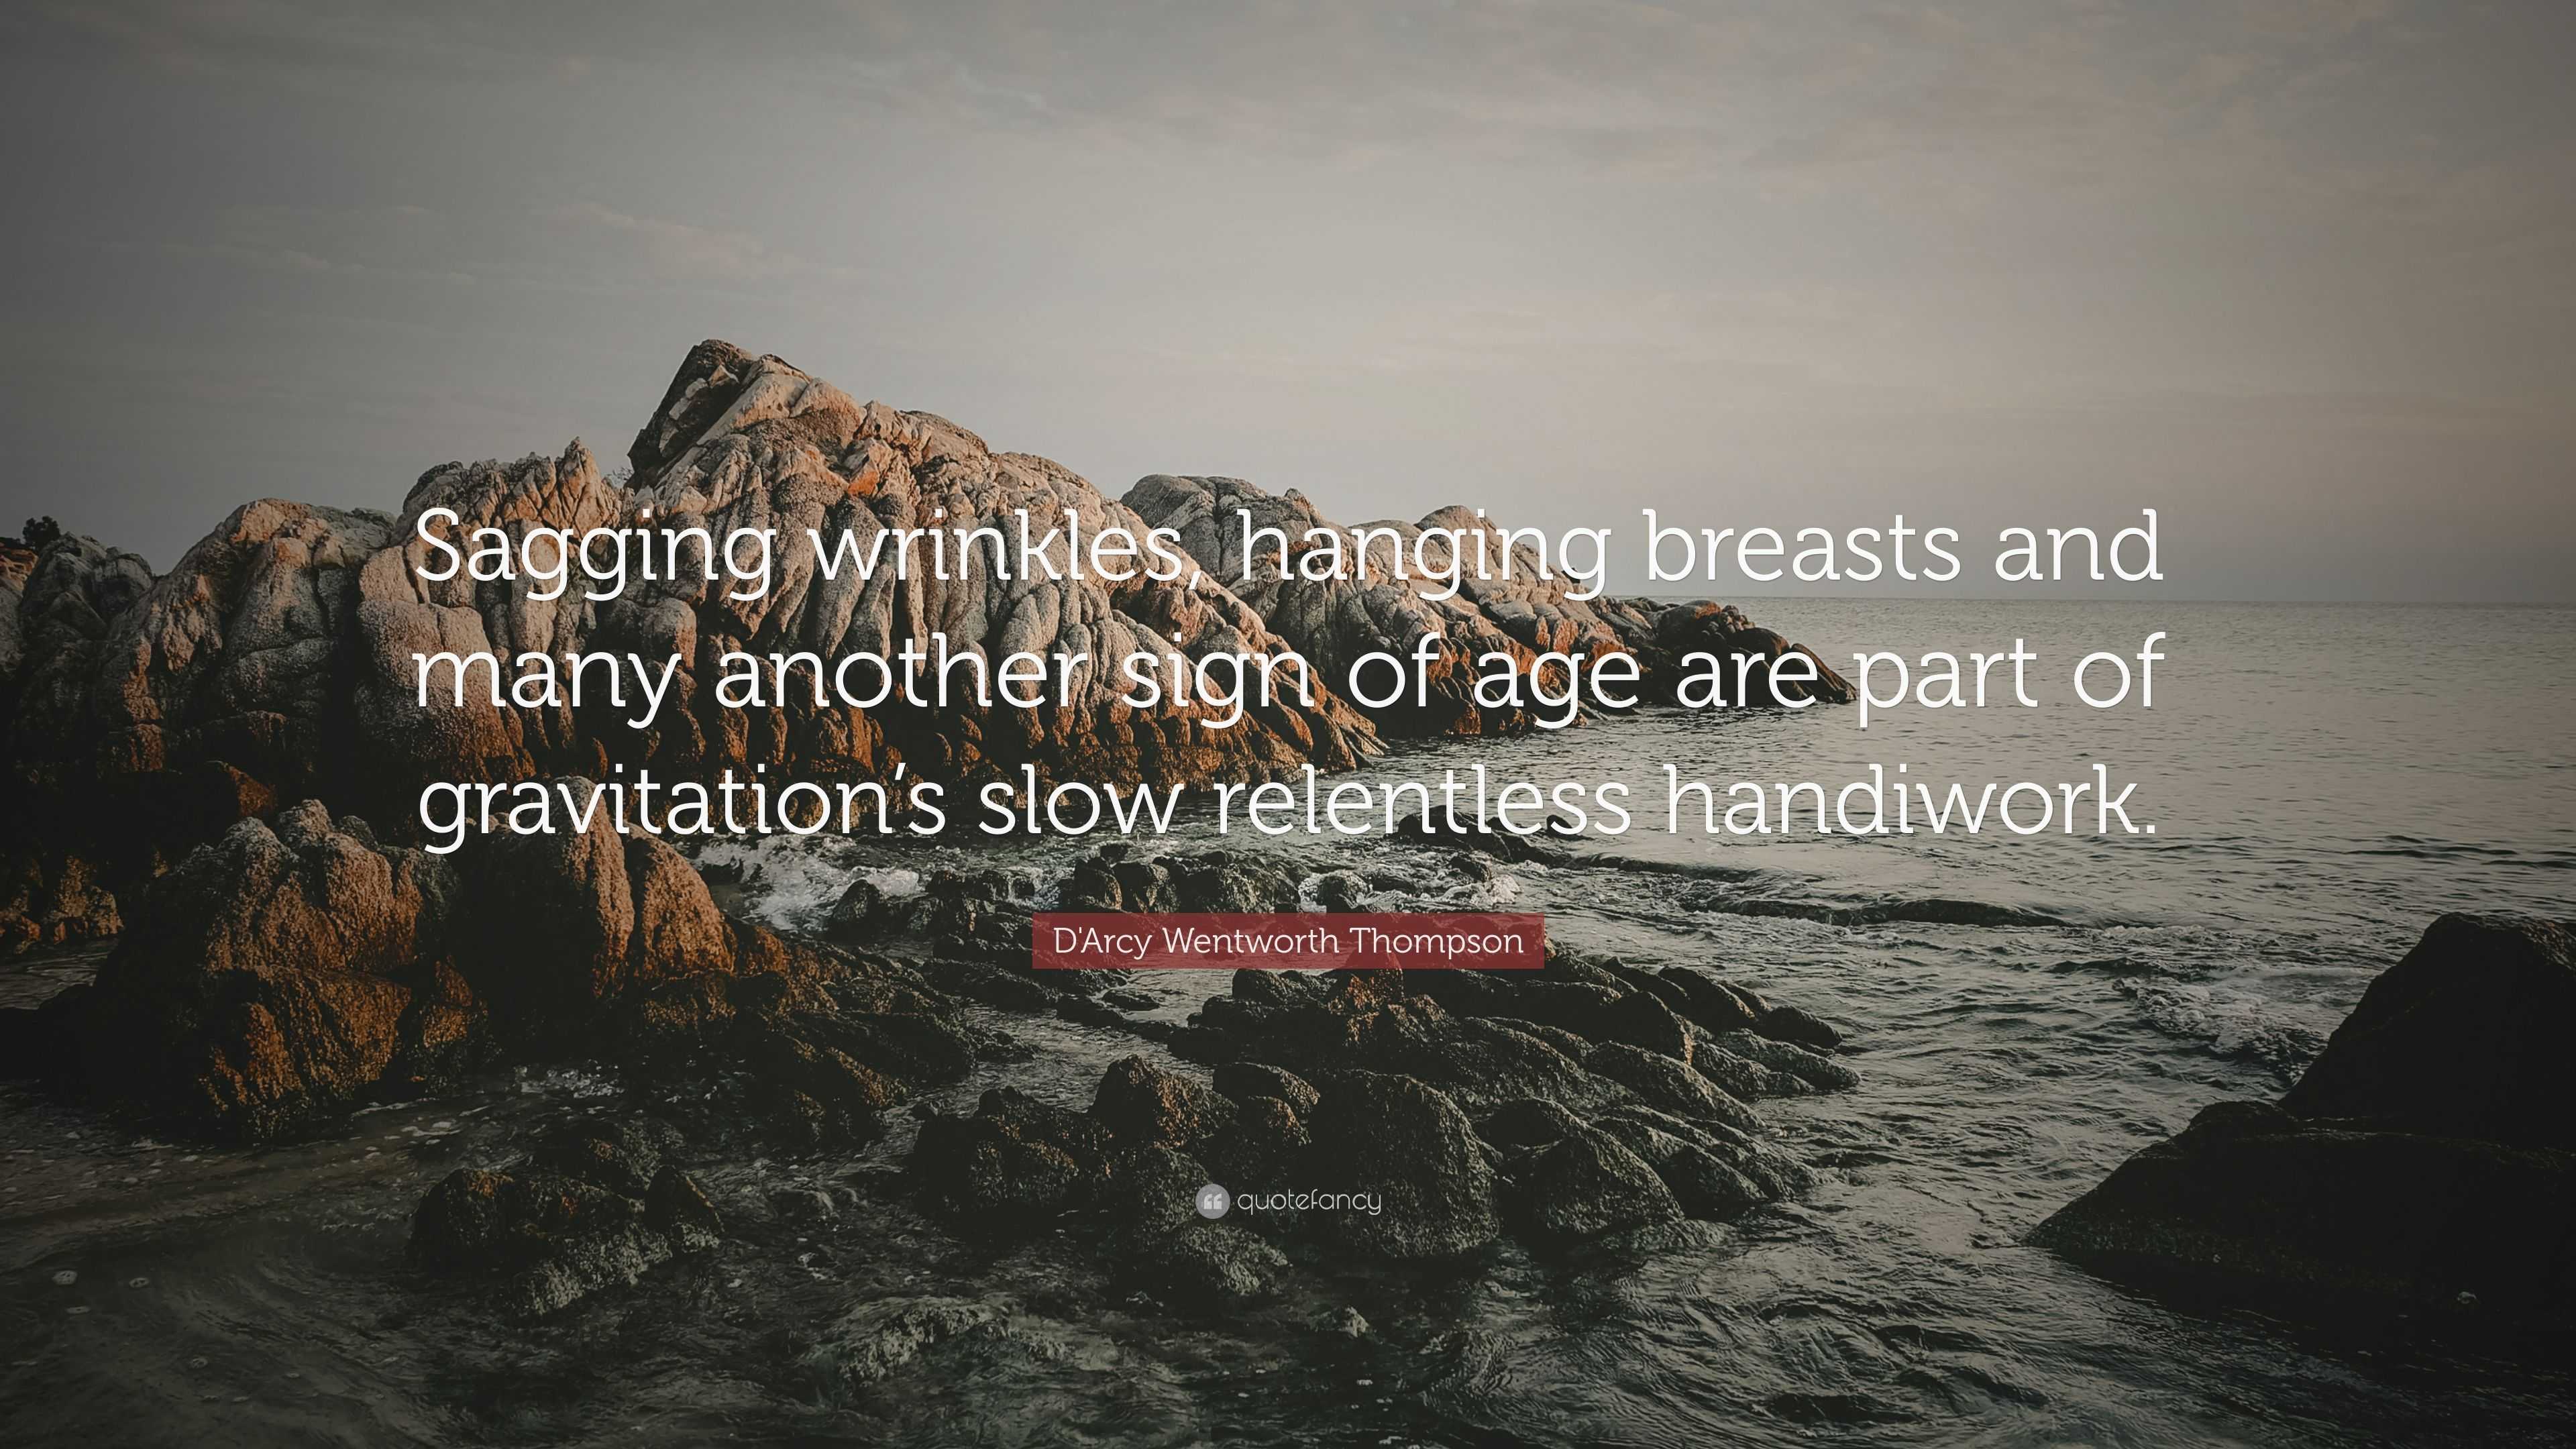 D'Arcy Wentworth Thompson Quote: “Sagging wrinkles, hanging